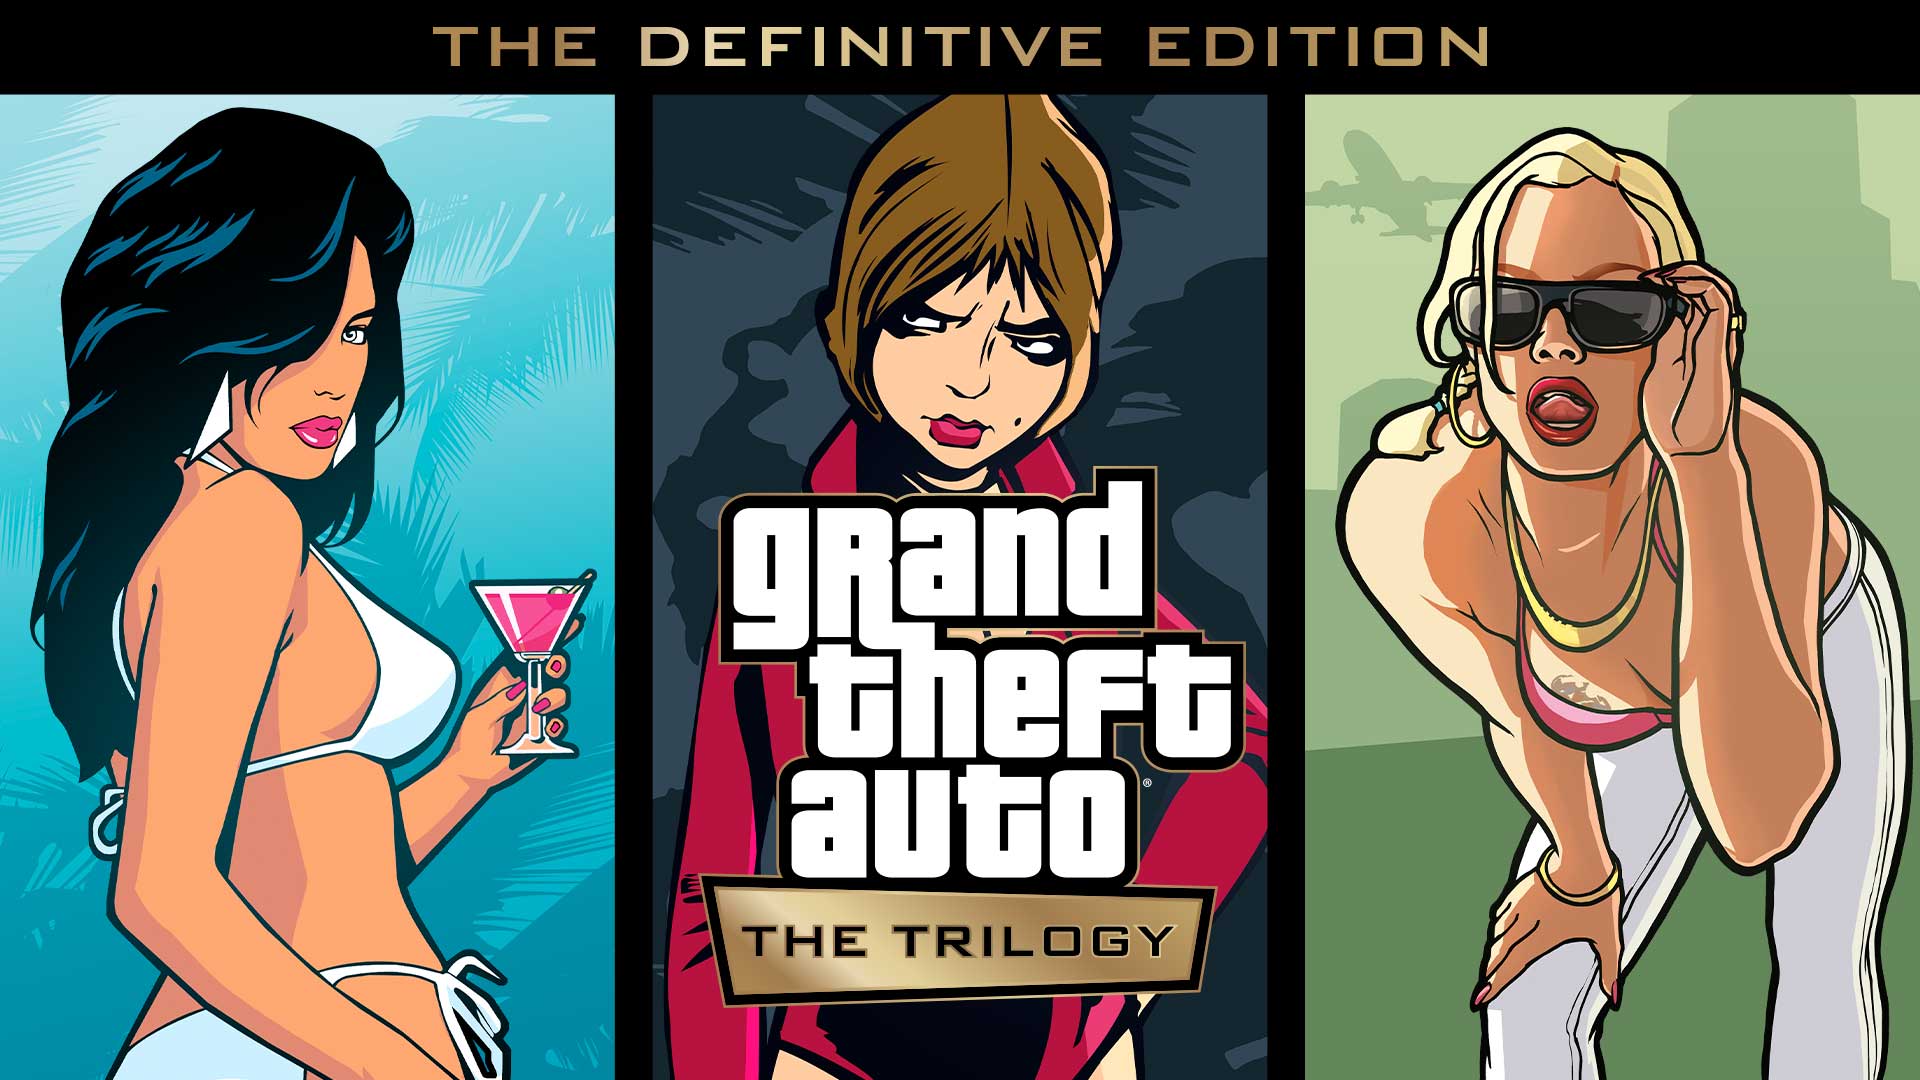 Grand Theft Auto The Trilogy – The Definitive Edition – 10 22 2021 – Still